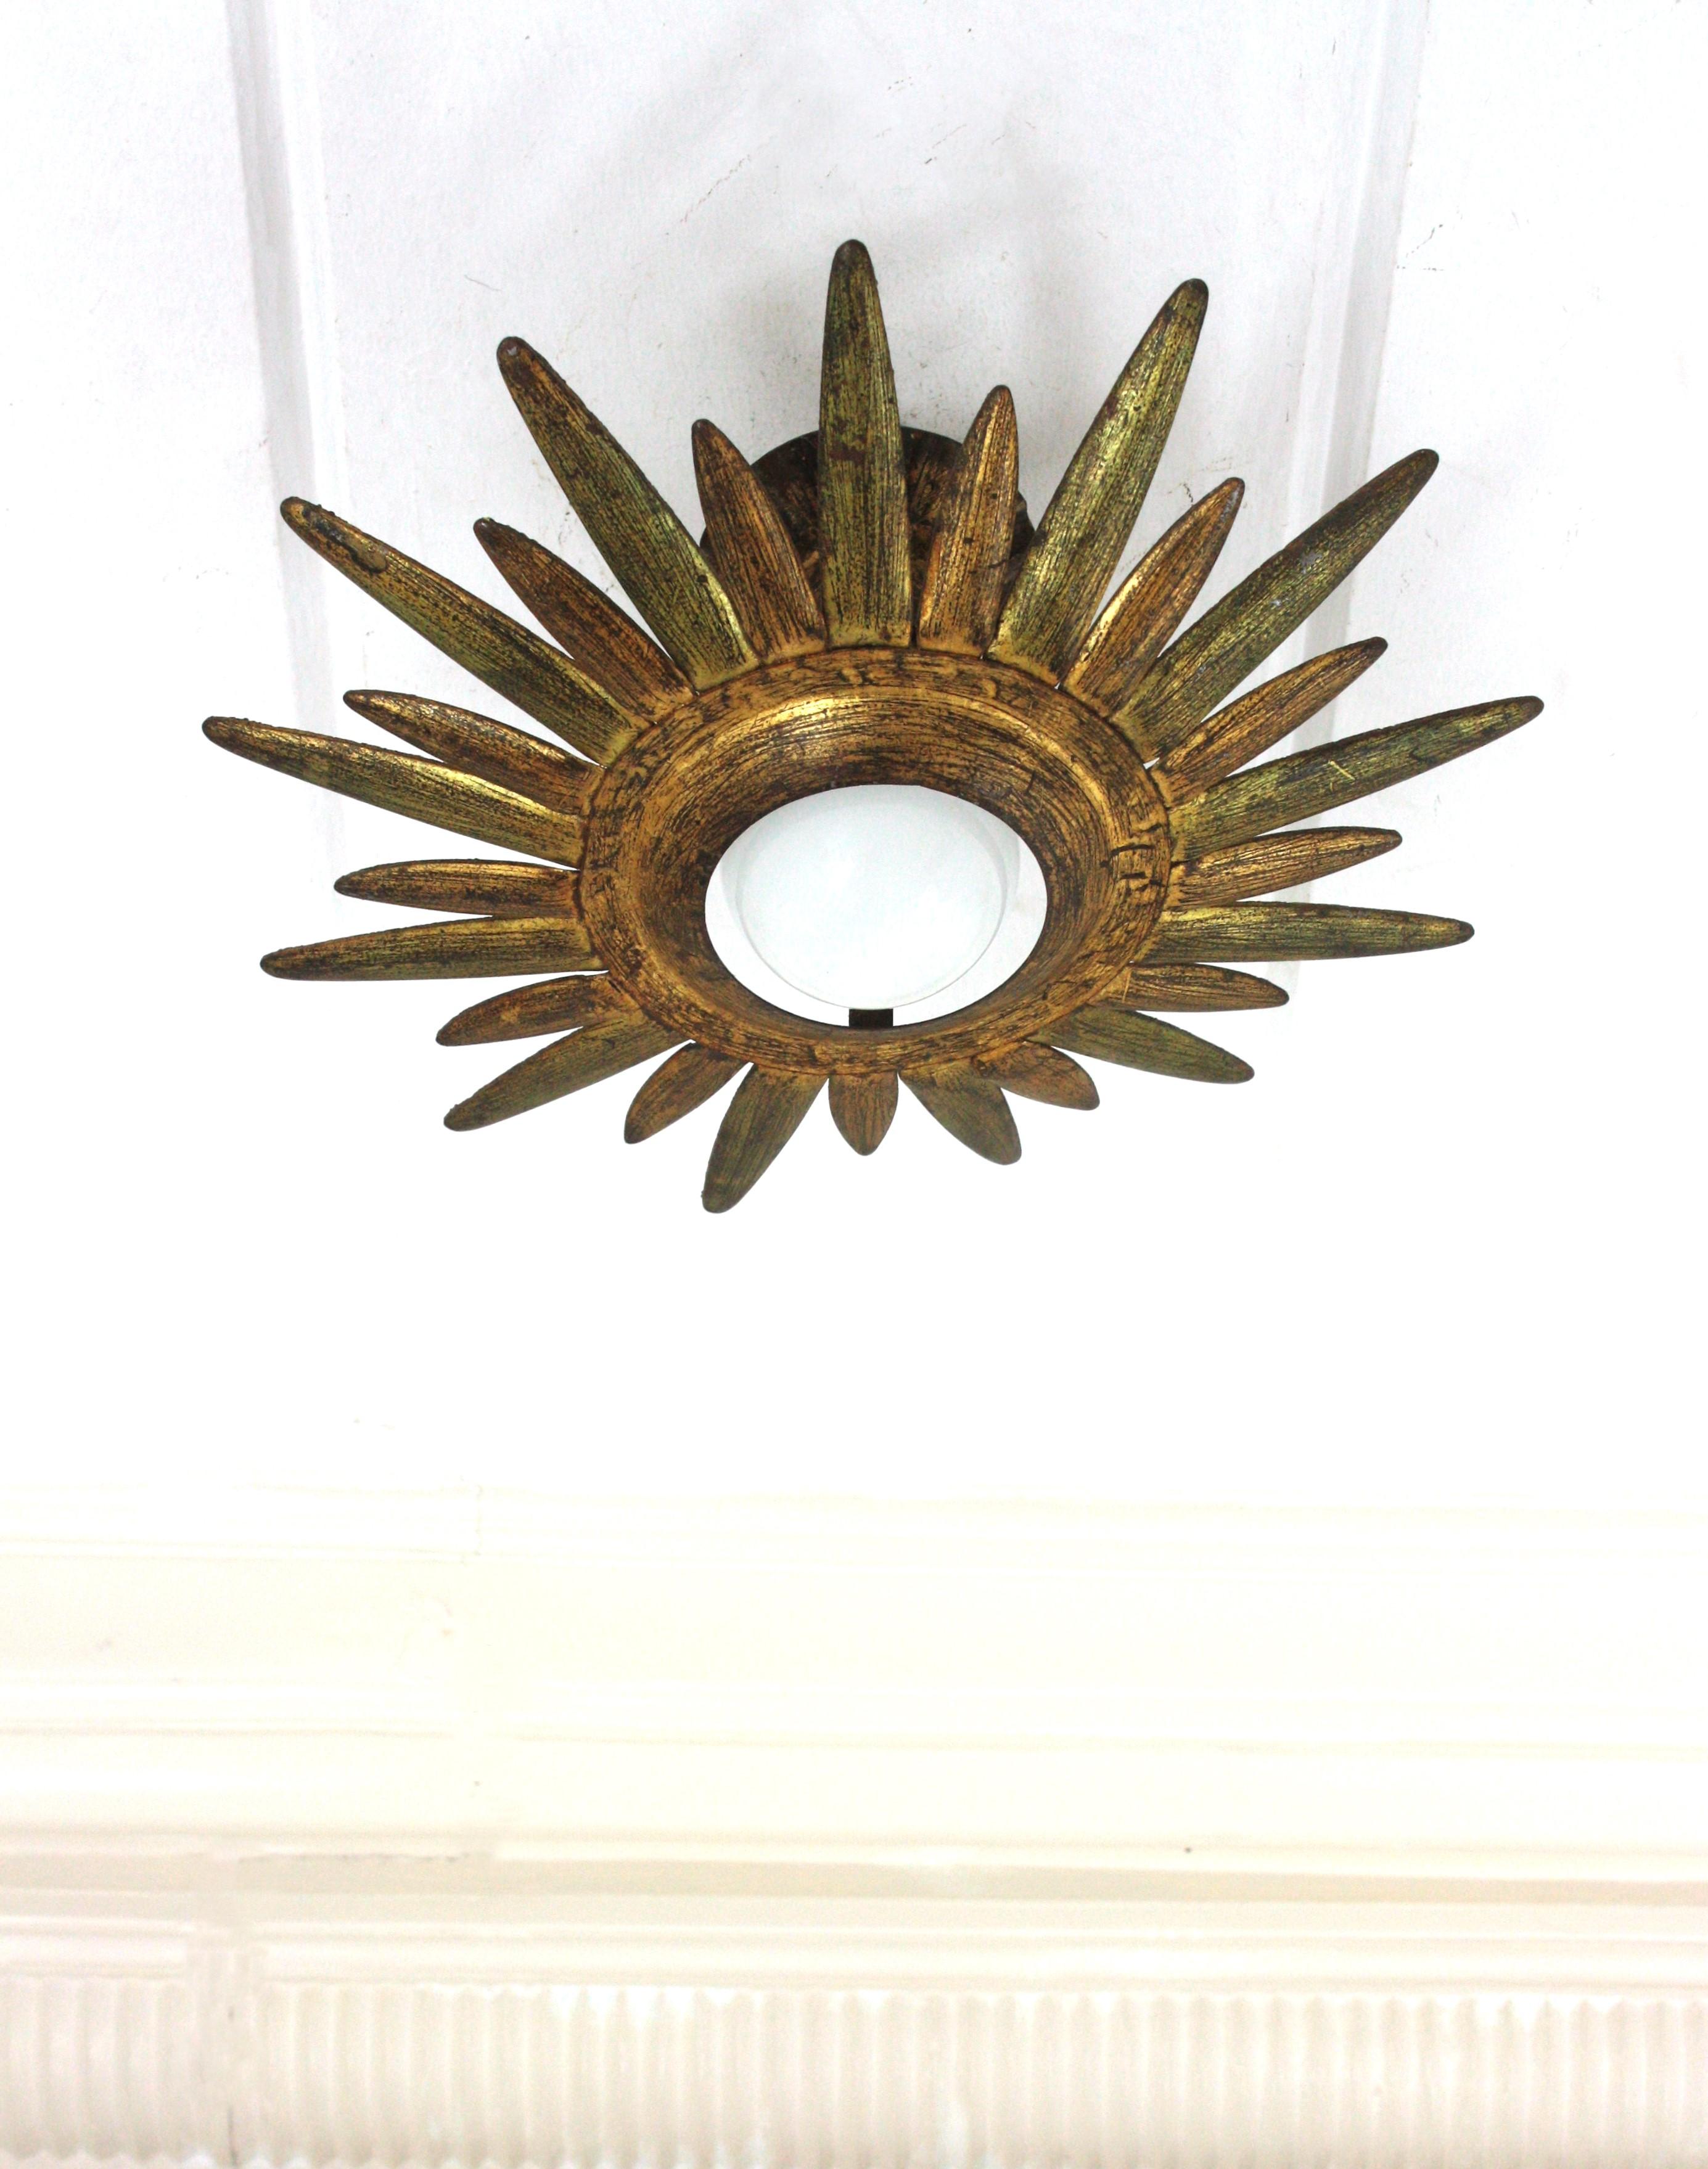 Eye-catching gilt wrought iron sunburst or starburst shaped ceiling light fixture or pendant, Spain, 1960s.
The starburst / sunburst shaped frame surrounds a central exposed bulb. 
This flush mount has a terrific aged patina and shows its original